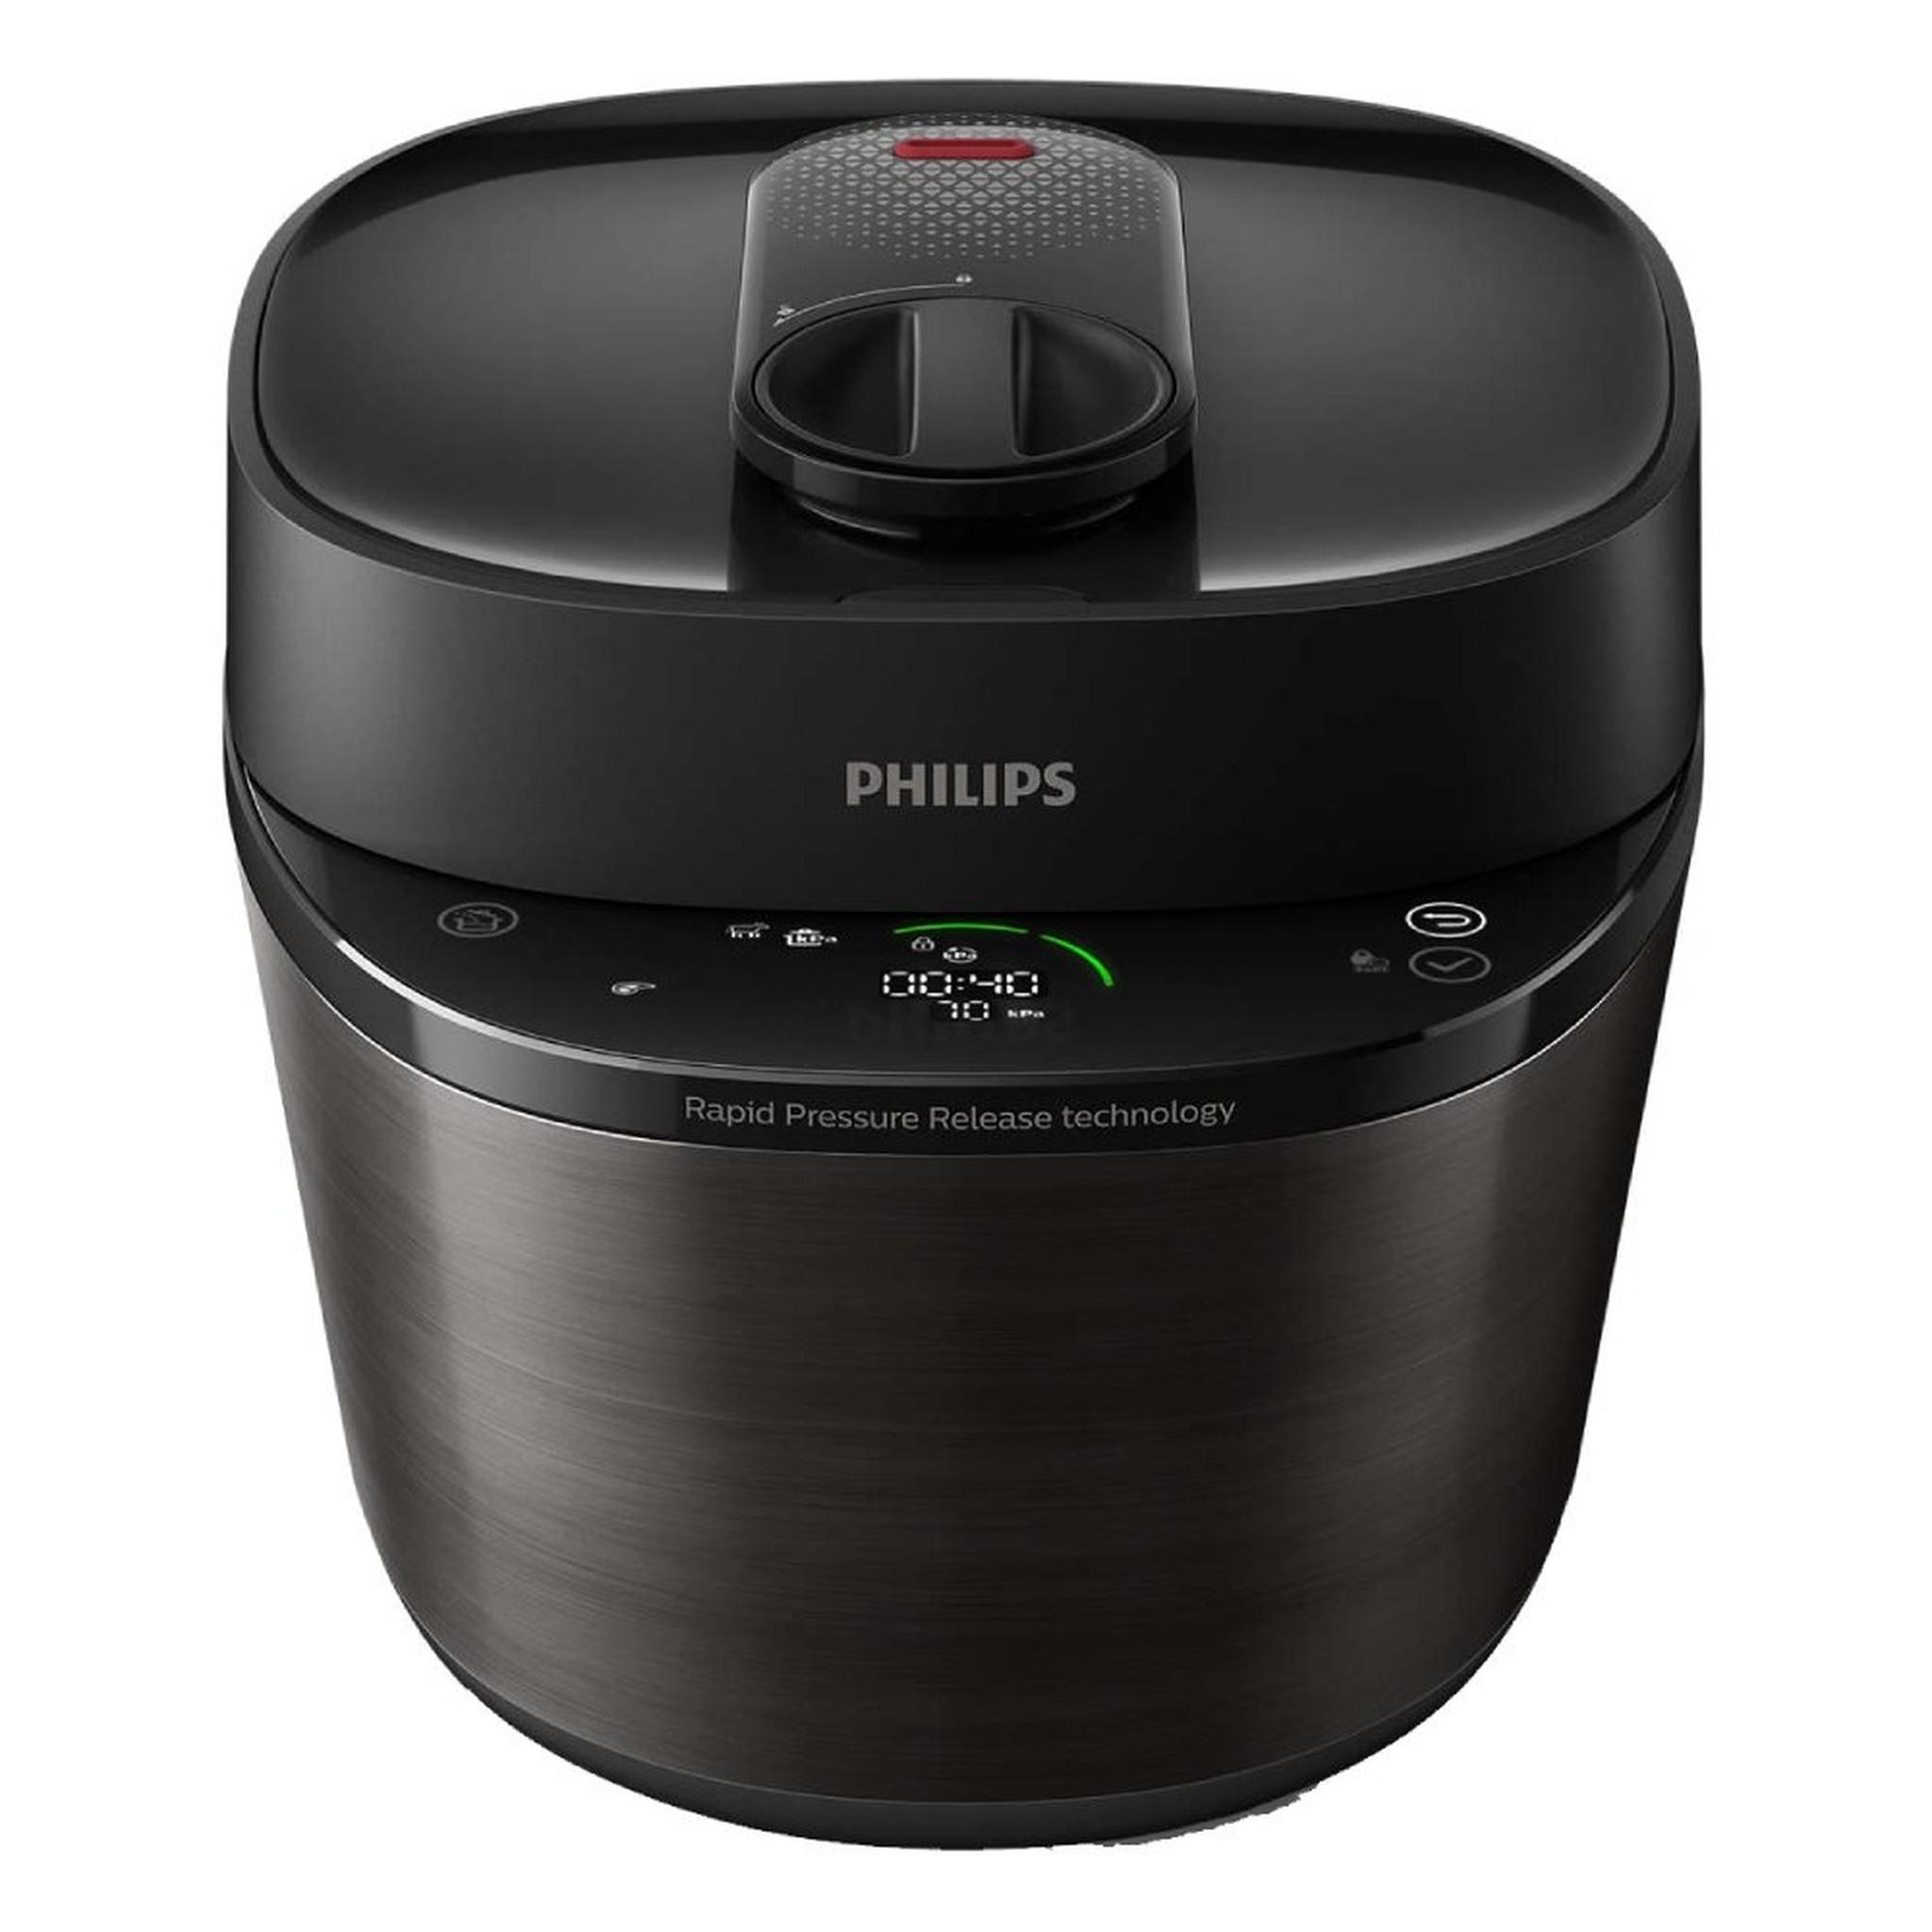 Philips All-in-One 1090W Pressure Cooker